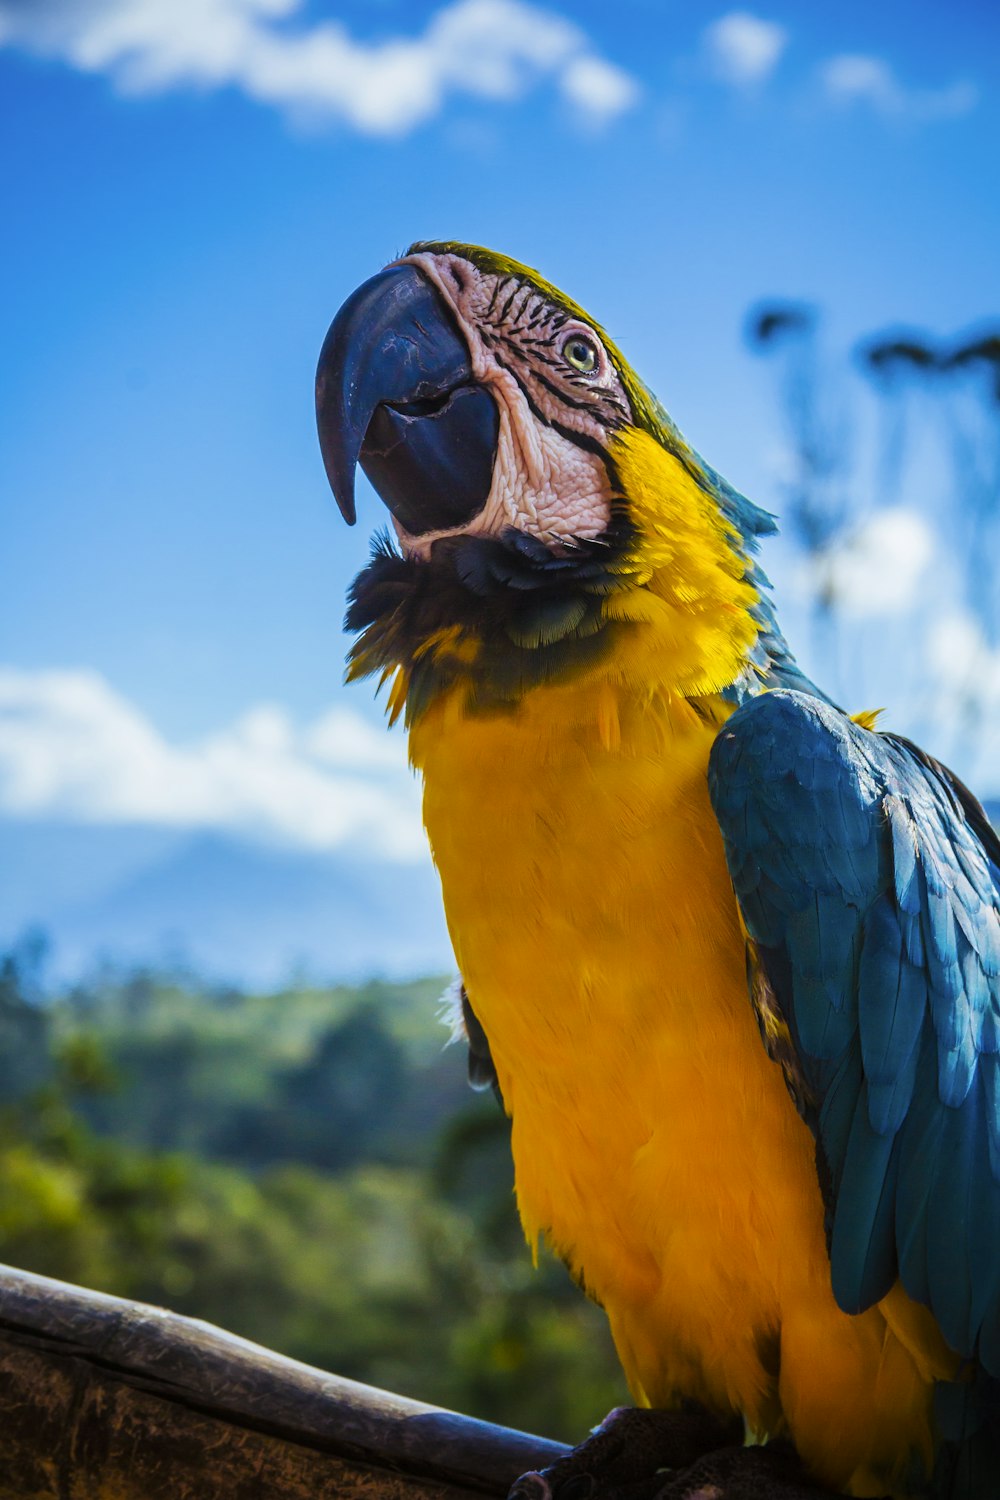 yellow and blue parrot perched on wood